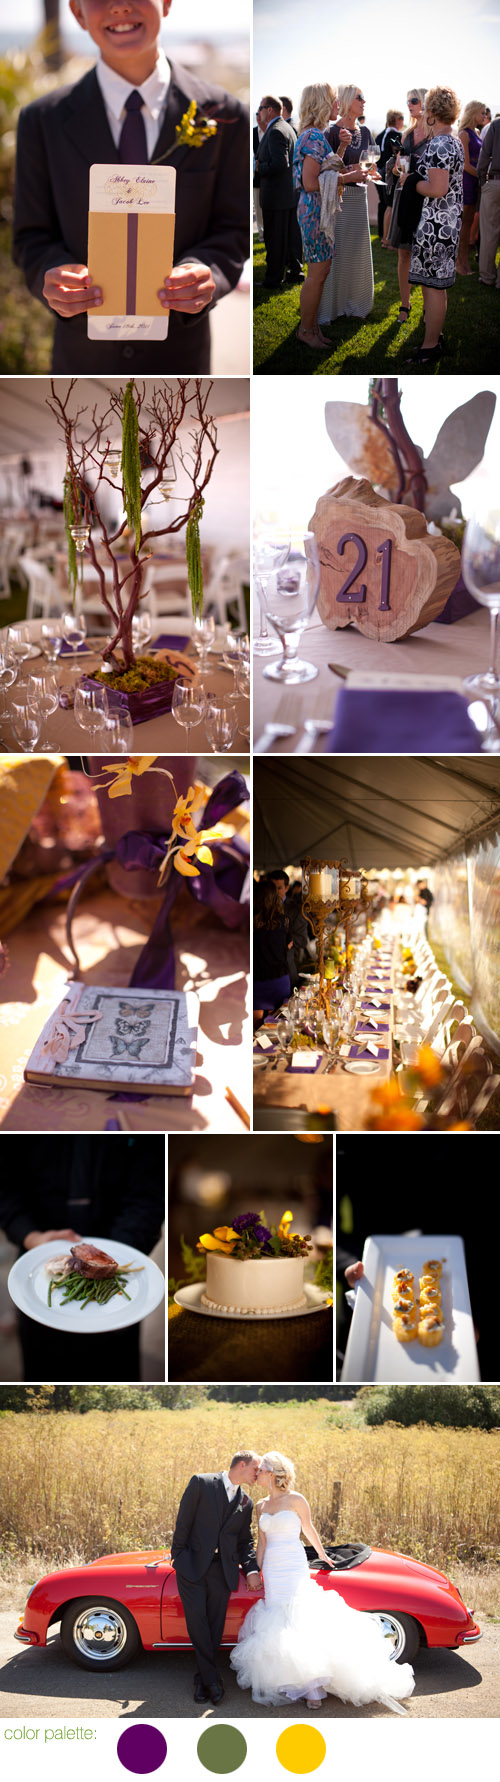 rustic chic california wedding at Dolphin Bay Resort, purple, green and gold butterfly wedding color ideas, photos by Schaap Studios